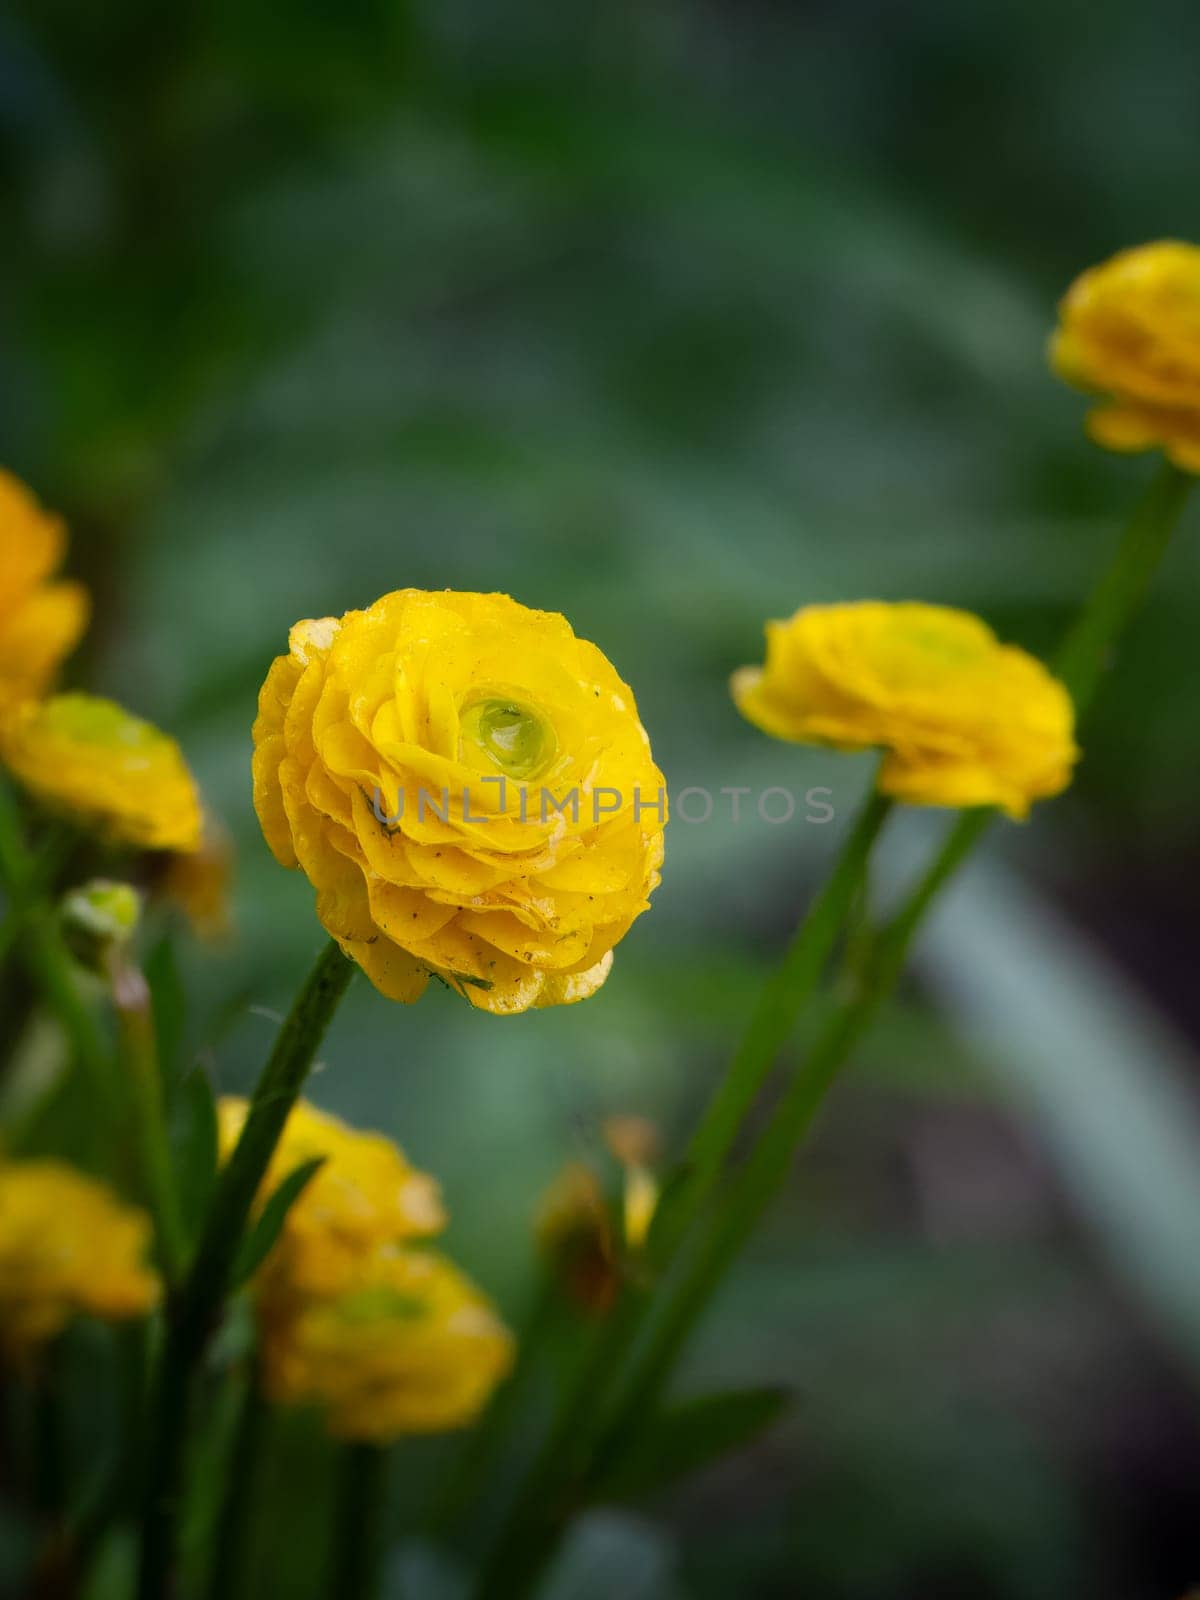 Persian buttercup or Ranunculus asiaticus with yellow color flowers. by mvg6894